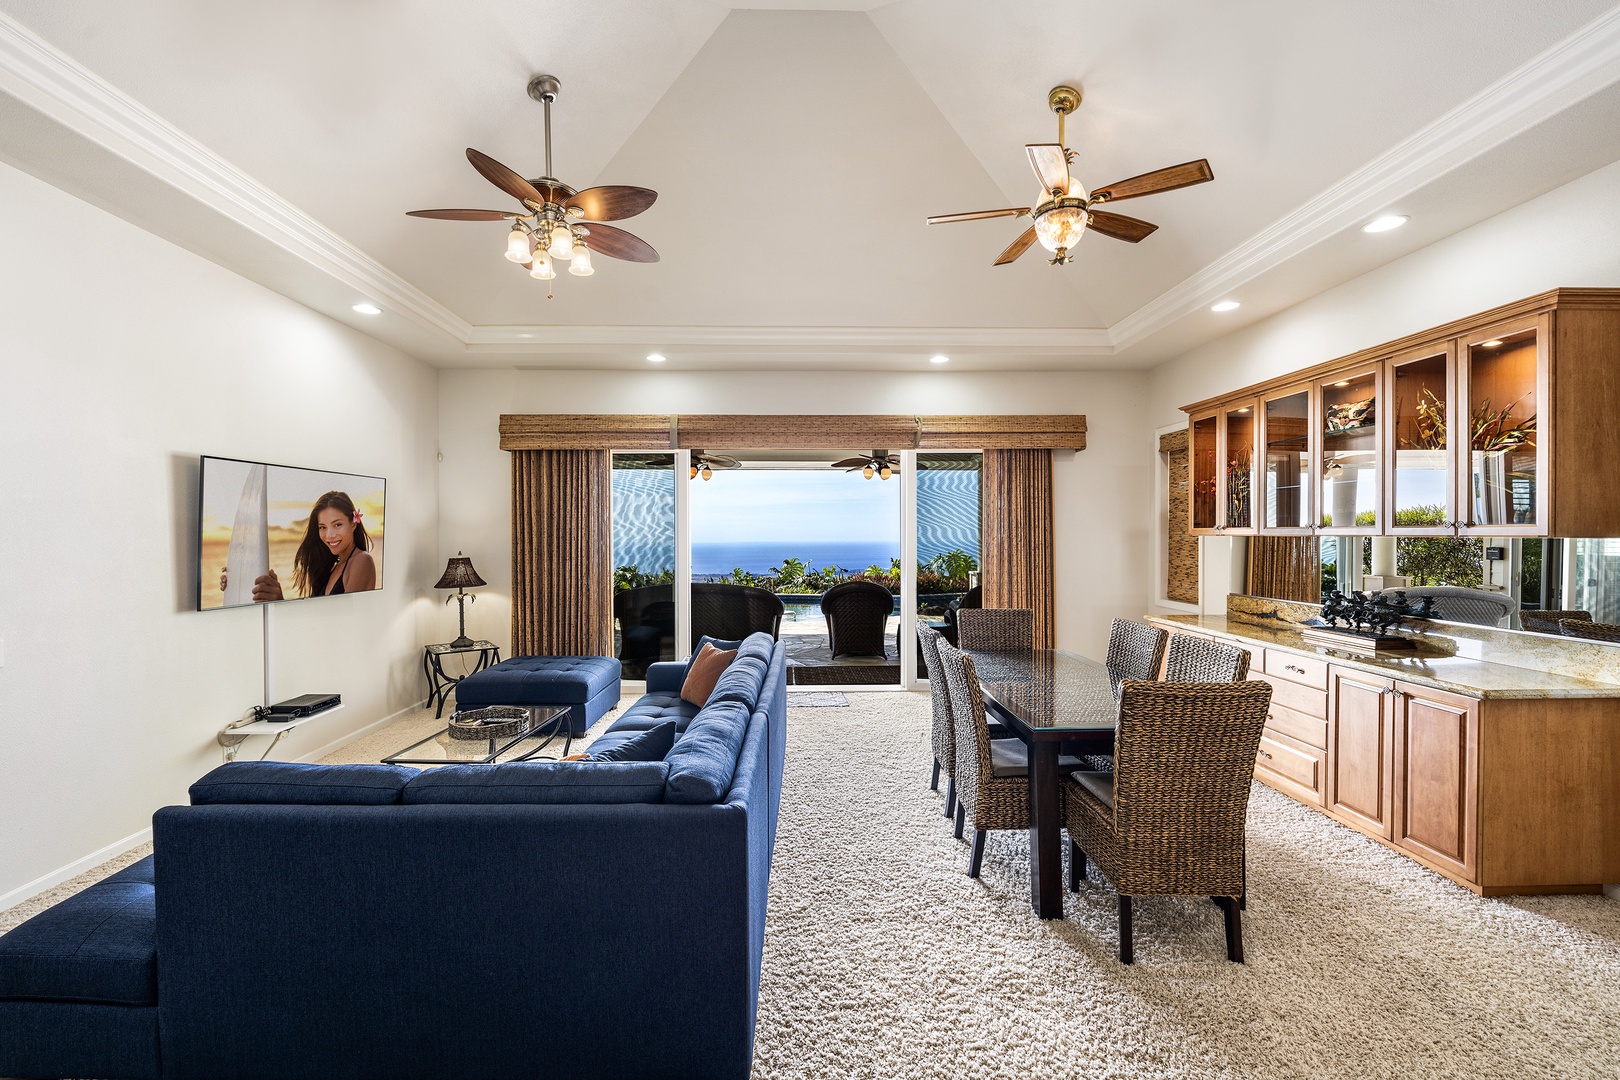 Kailua Kona Vacation Rentals, Piko Nani - Open sightlines with vaulted ceilings